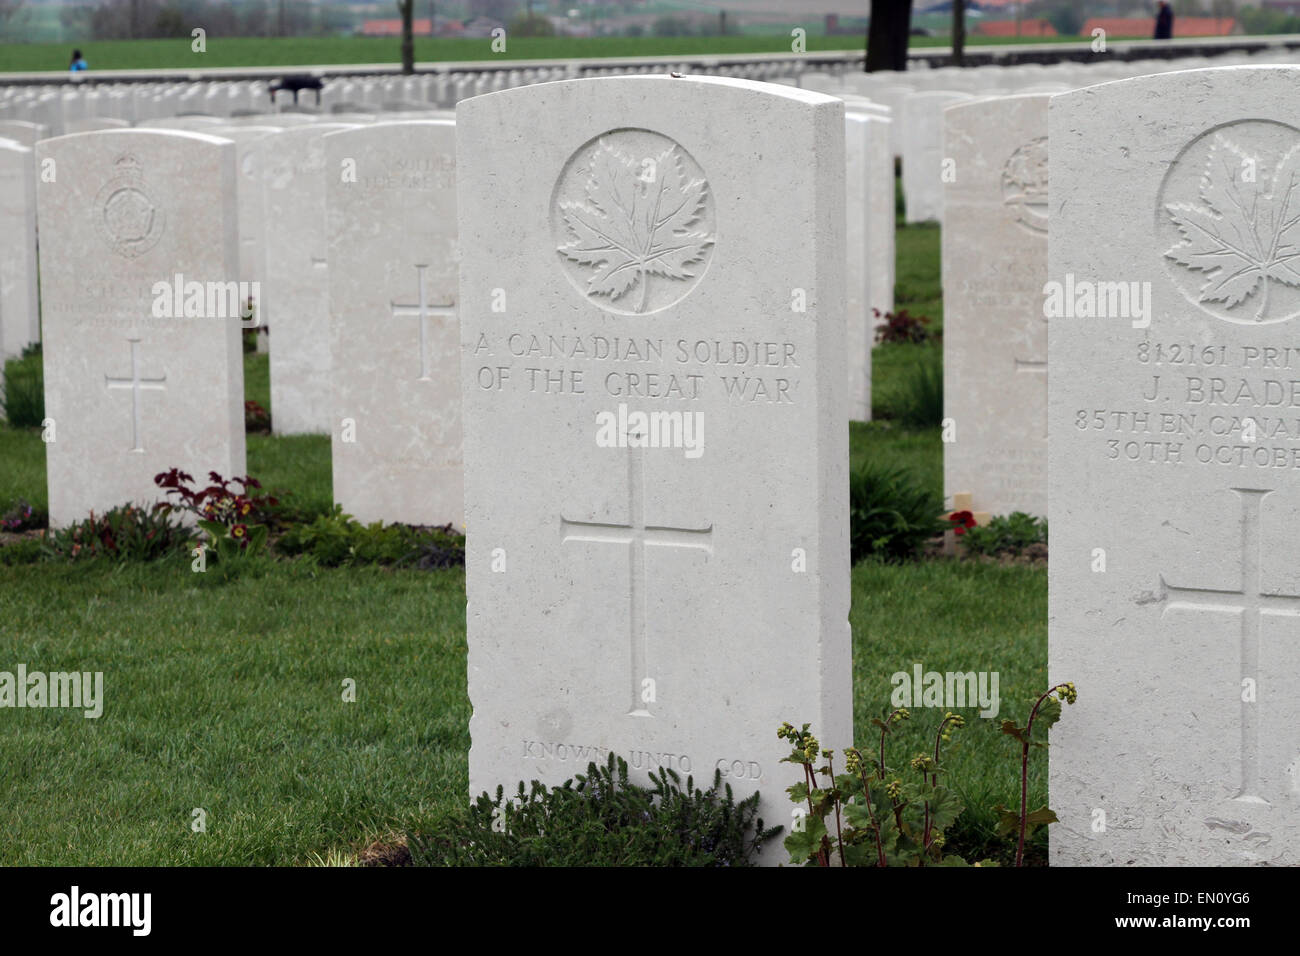 The grave of a Canadian soldier at Tyne Cot cemetery, near Ypres, Belgium. Stock Photo